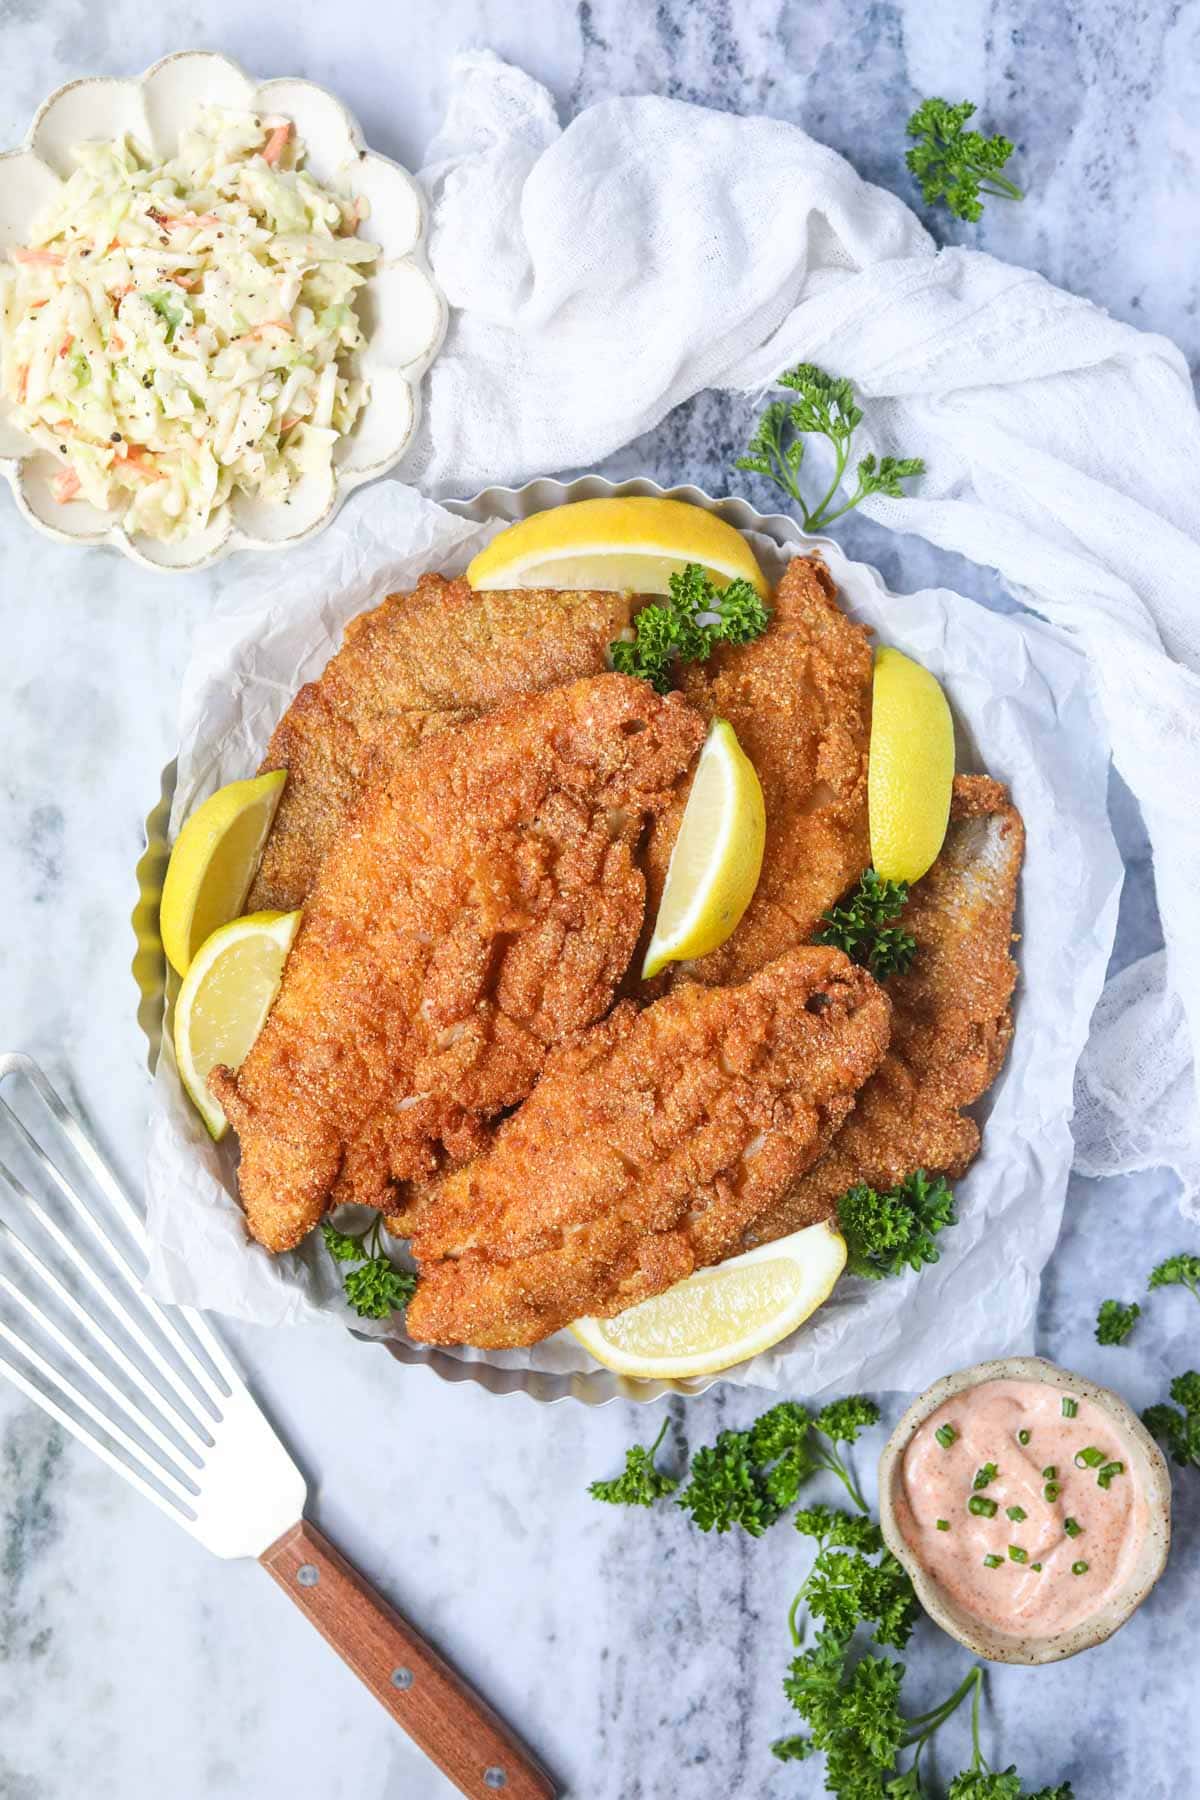 Southern fried catfish on a silver tray with Lemon slices.